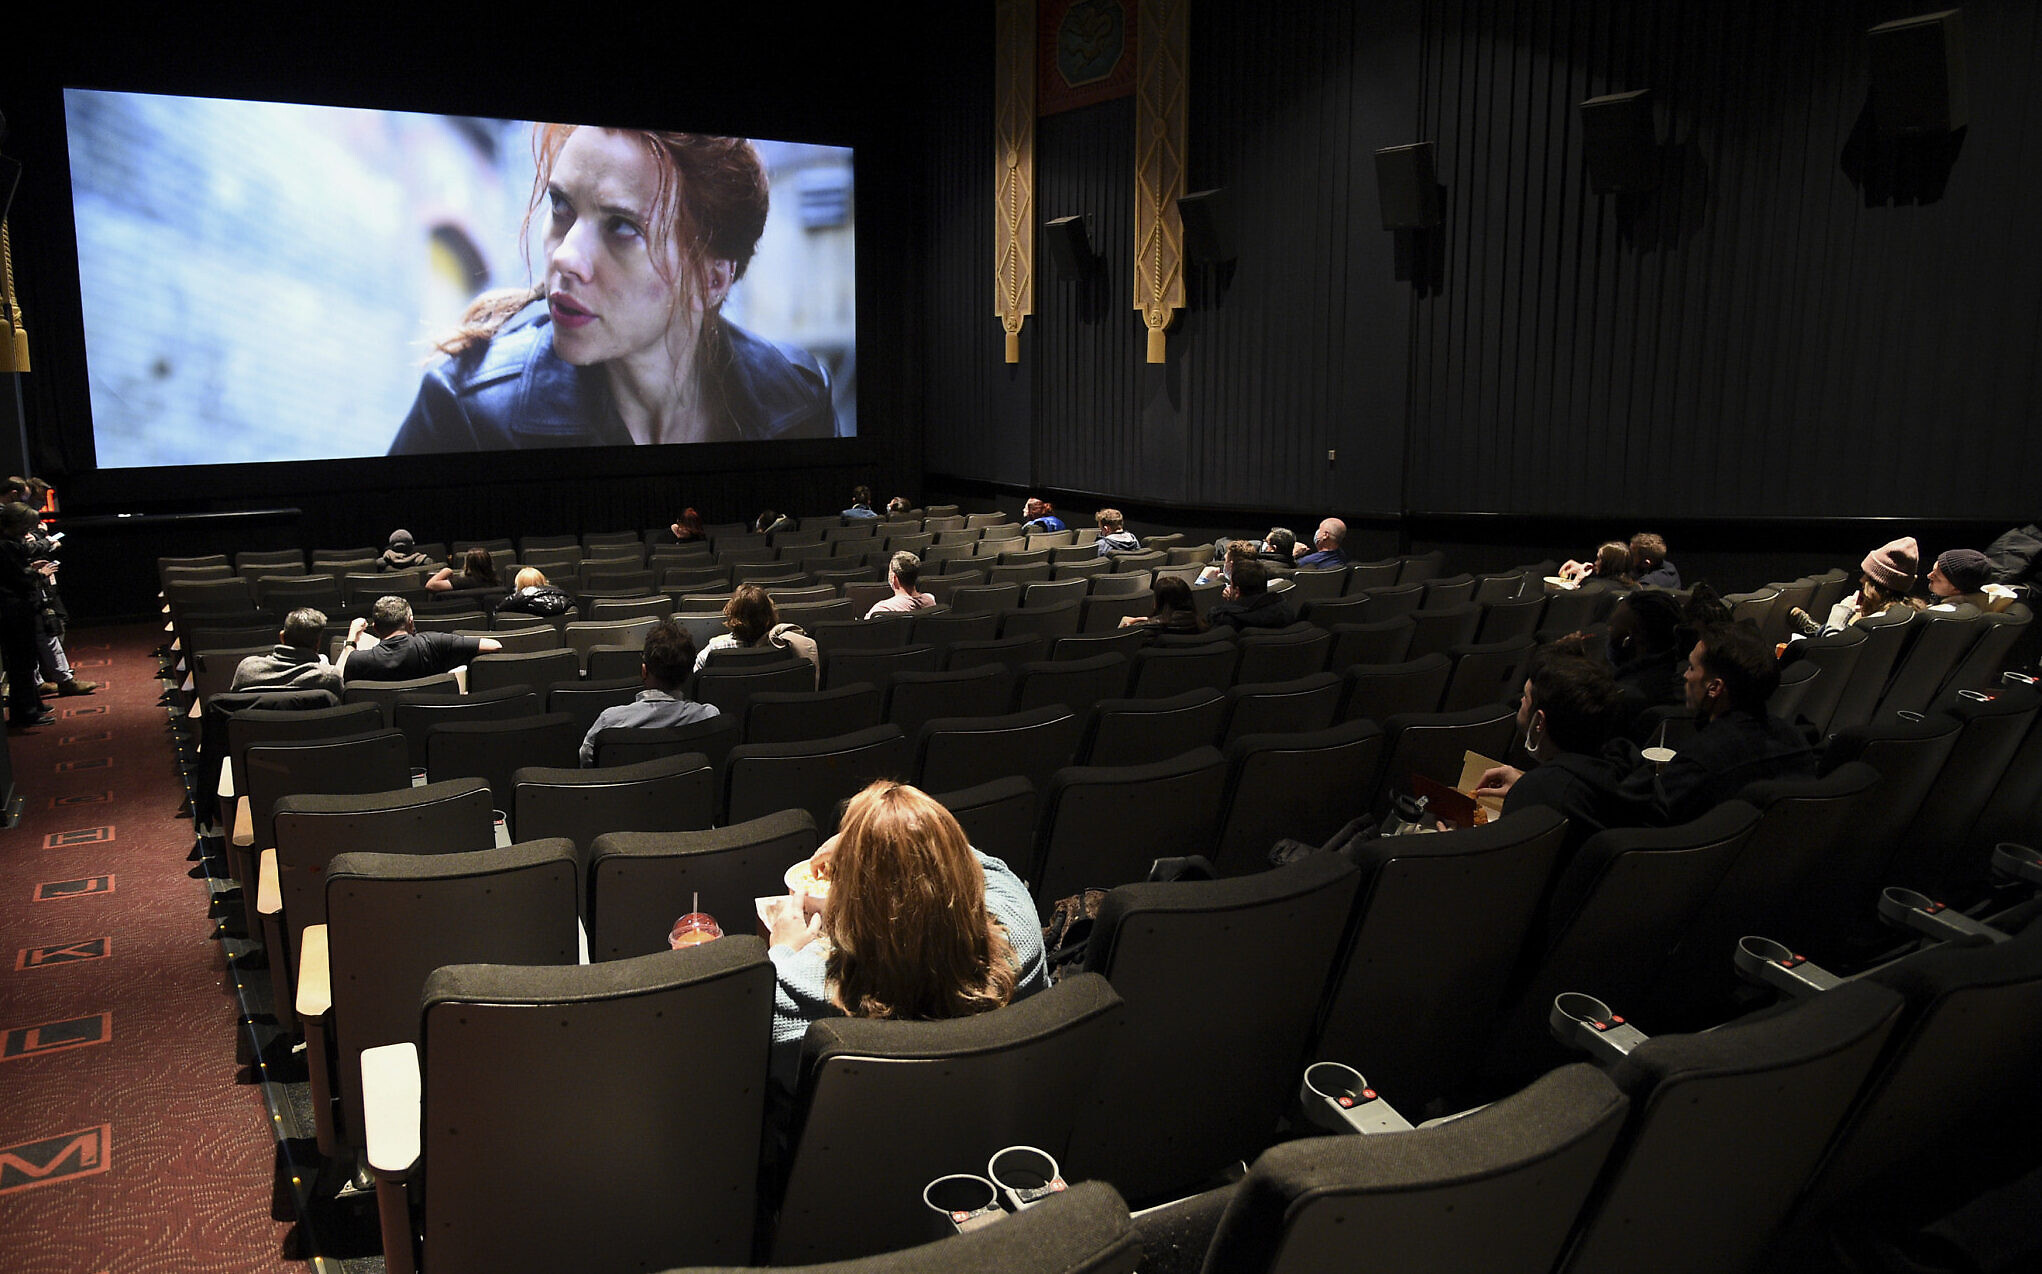 New York cinemas reopen after a year, brightening outlook for theaters